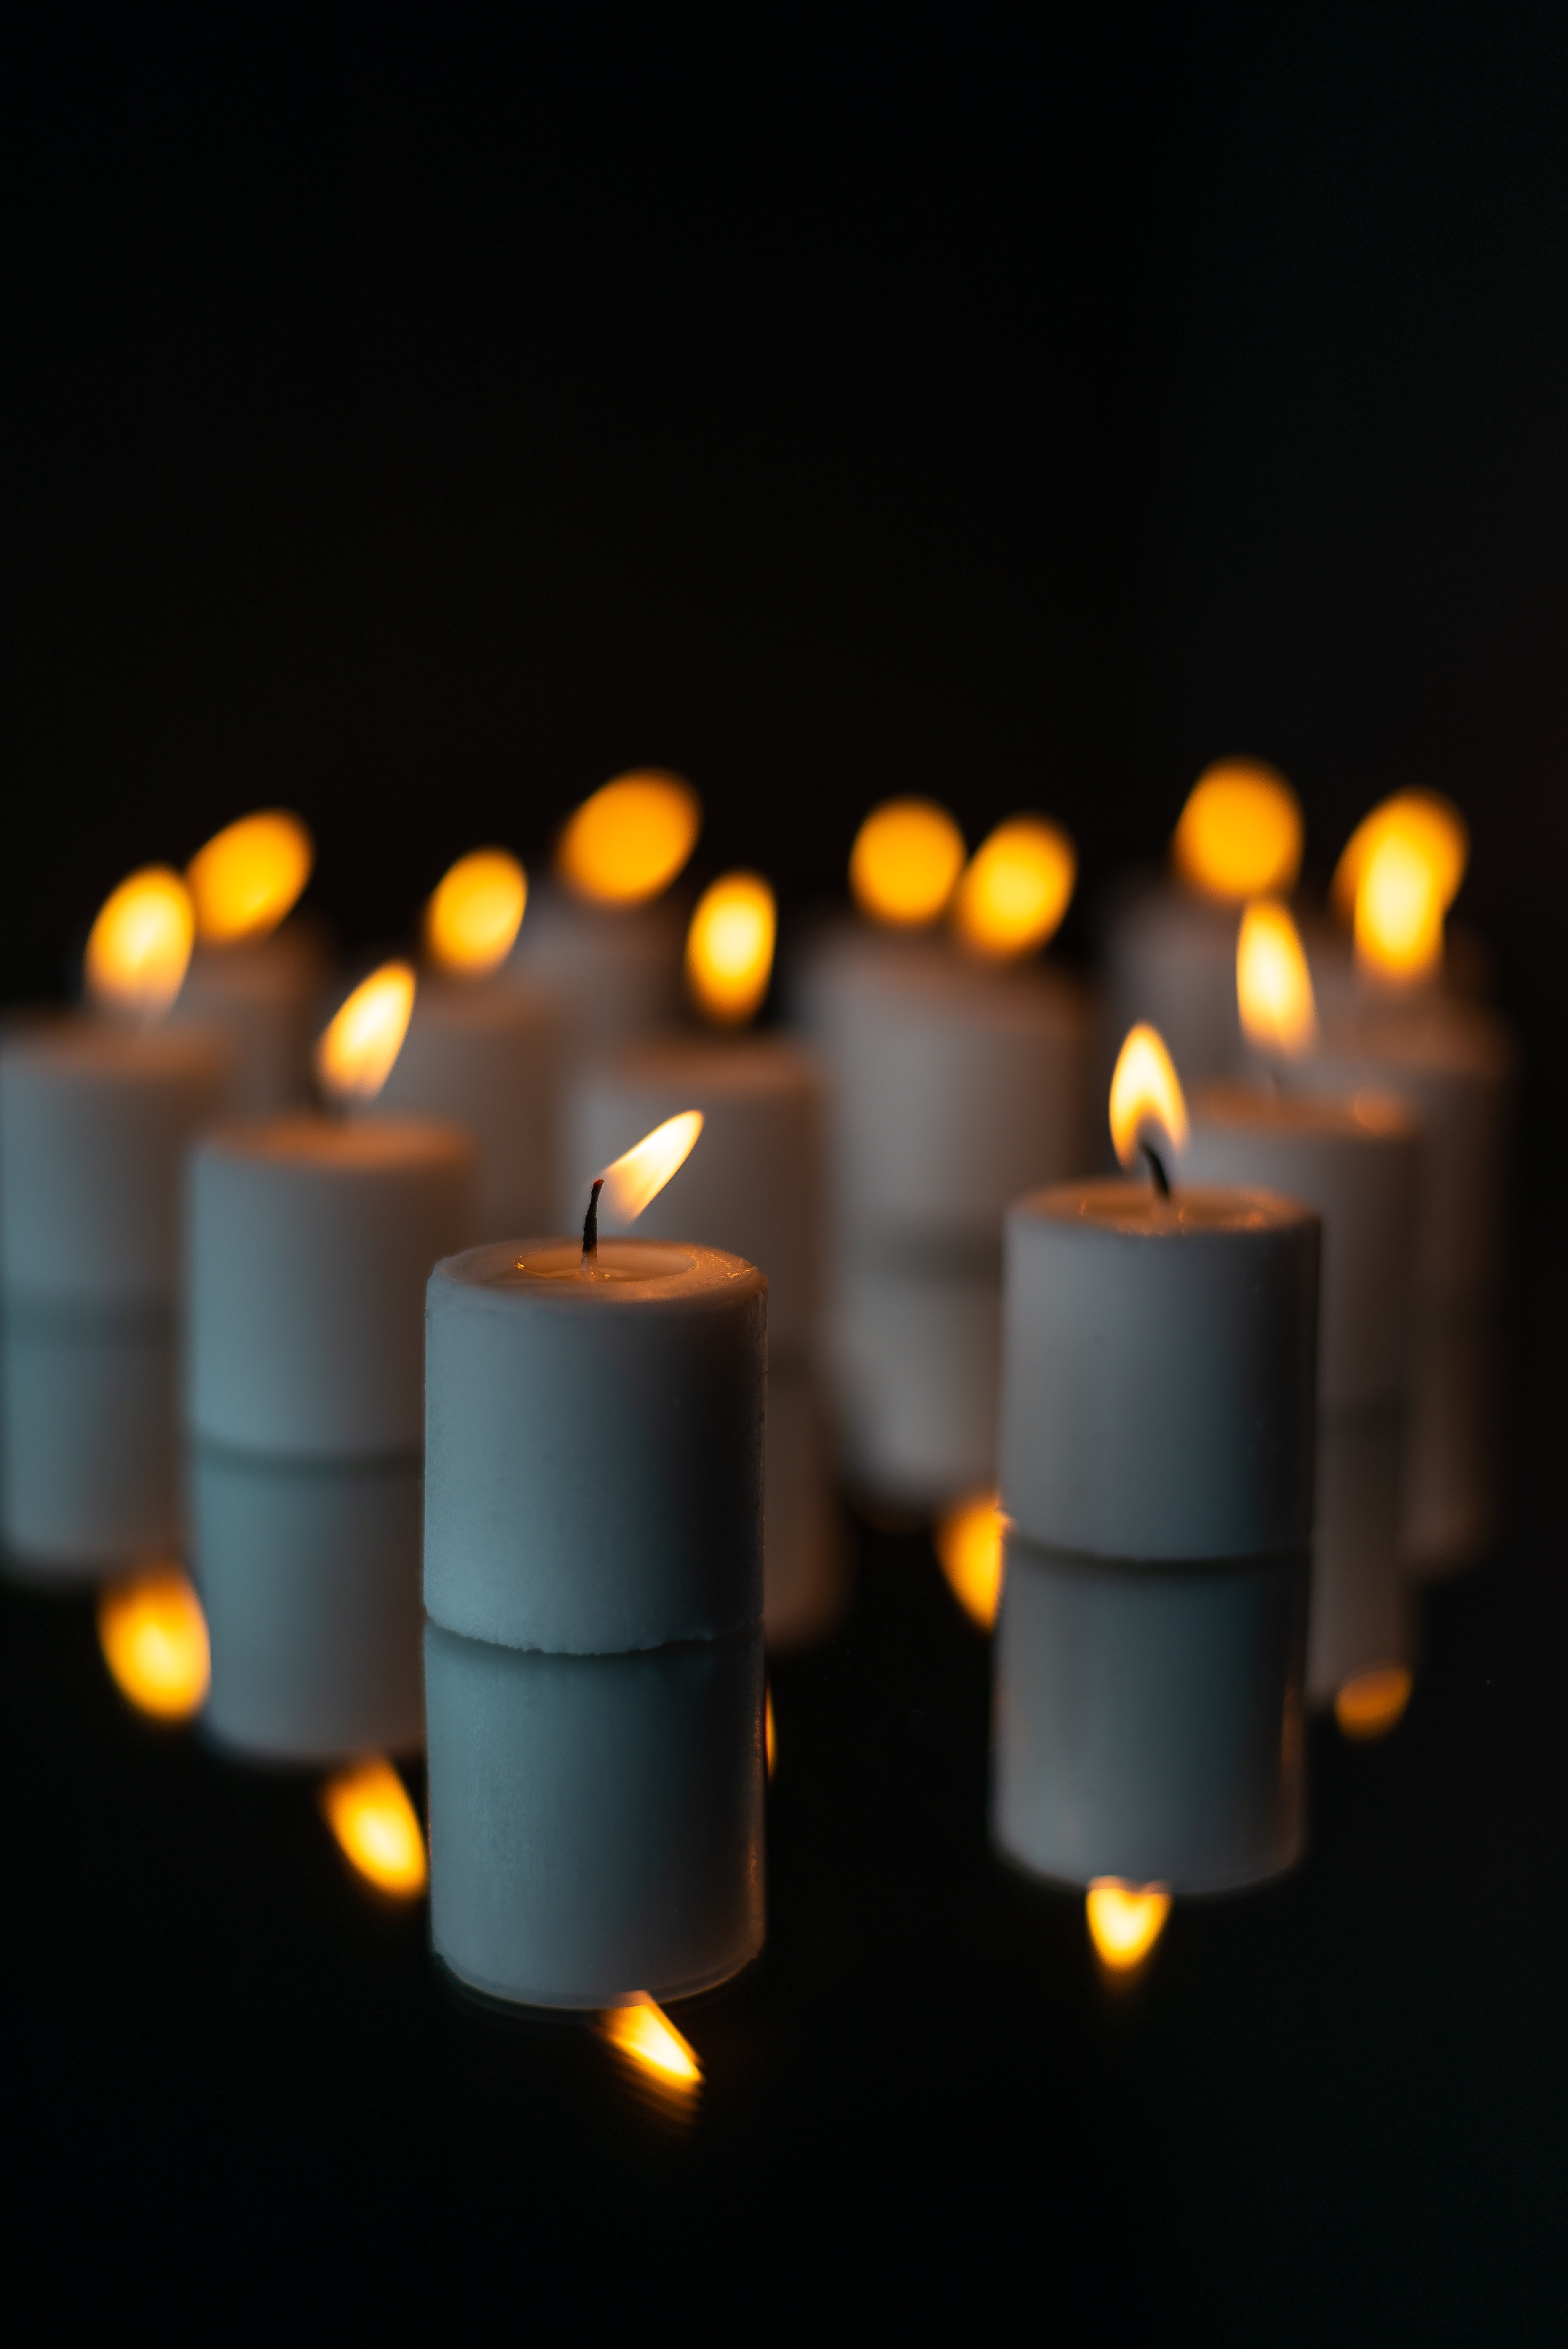 Candles 1080p